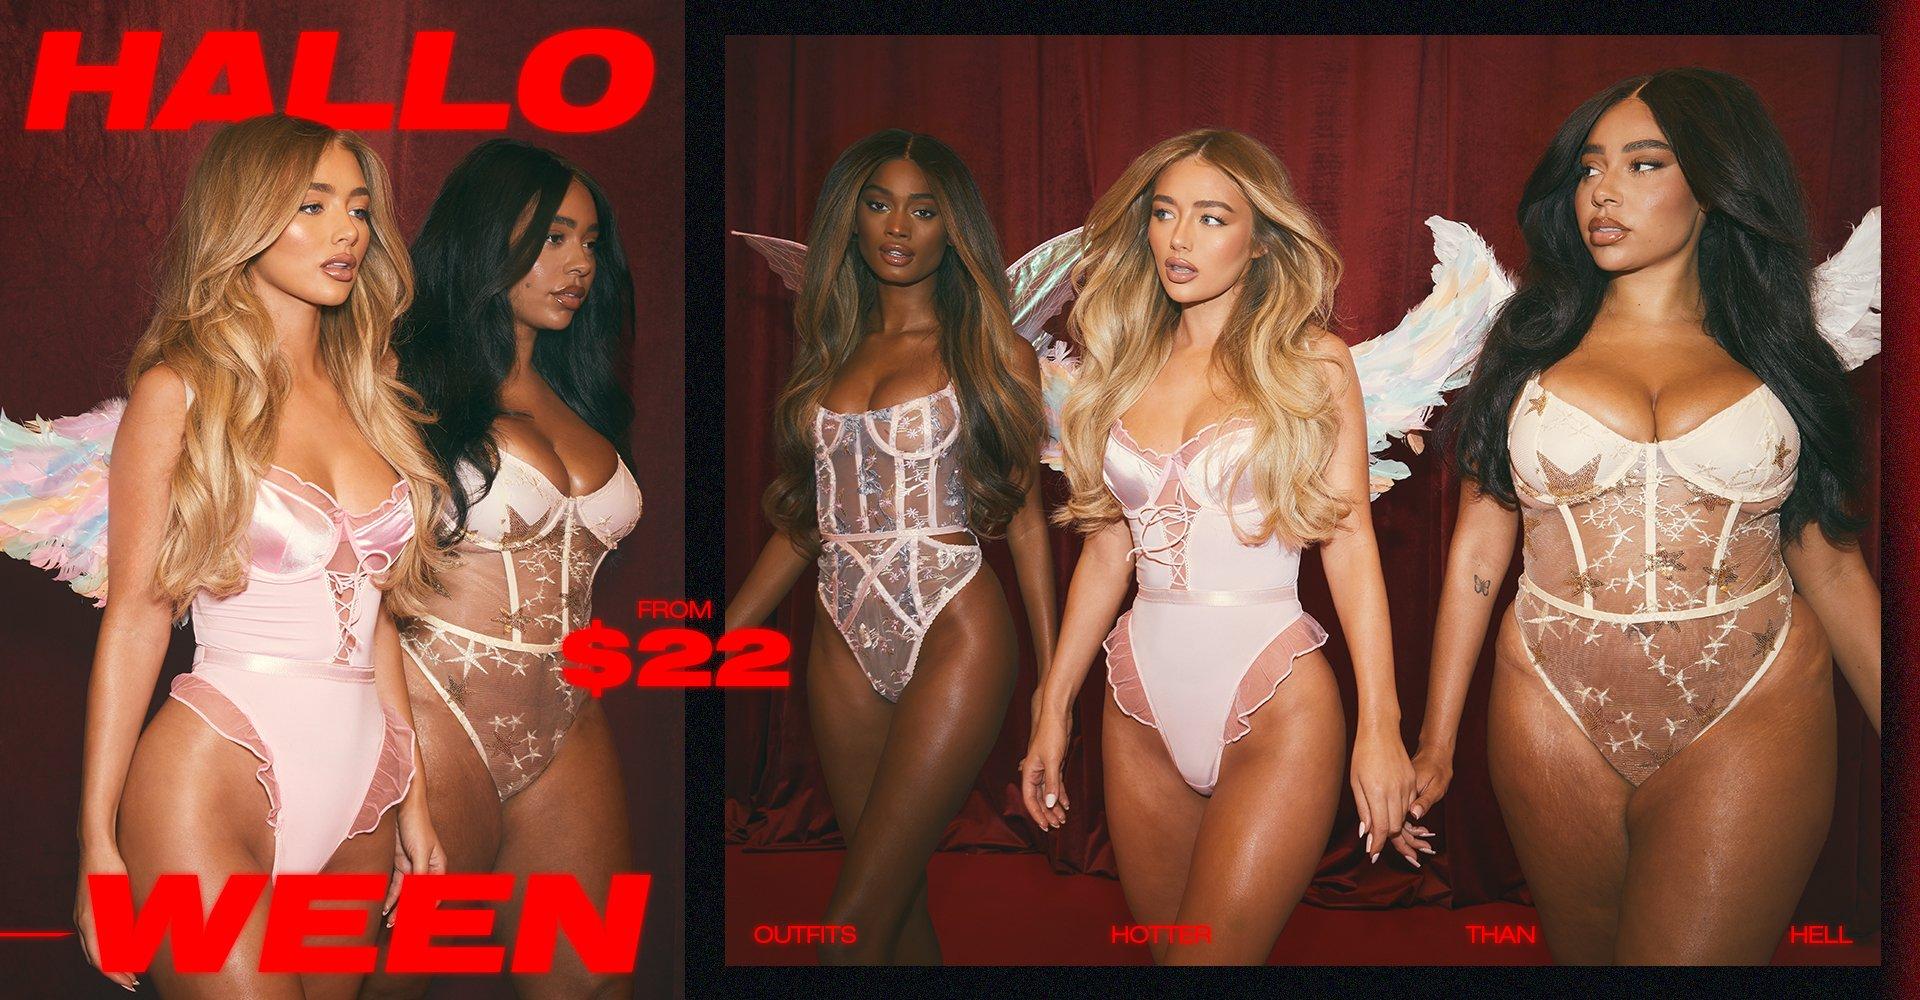 HALLOWEEN 23 OUTFITS HOTTER THAN HELL FROM $22